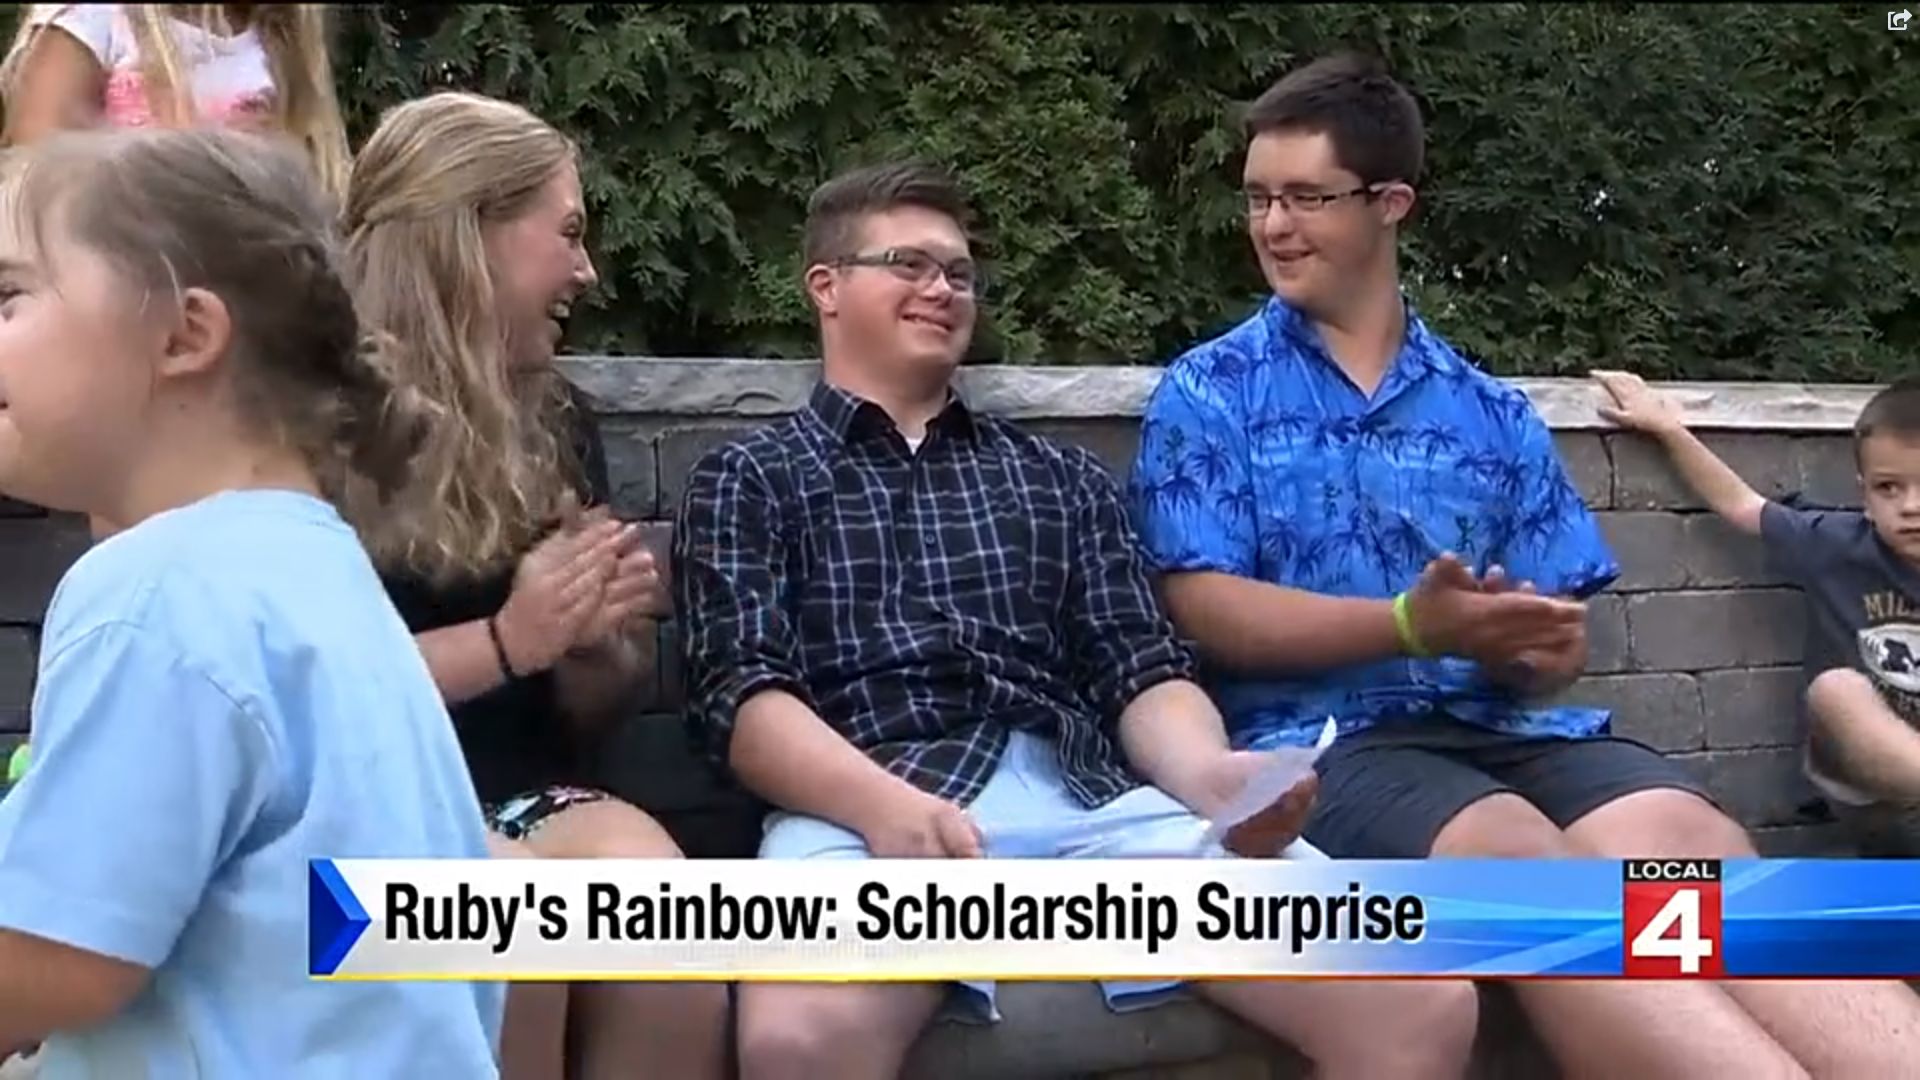 Rudy's Rainbow awards scholarship to students with Down syndrome